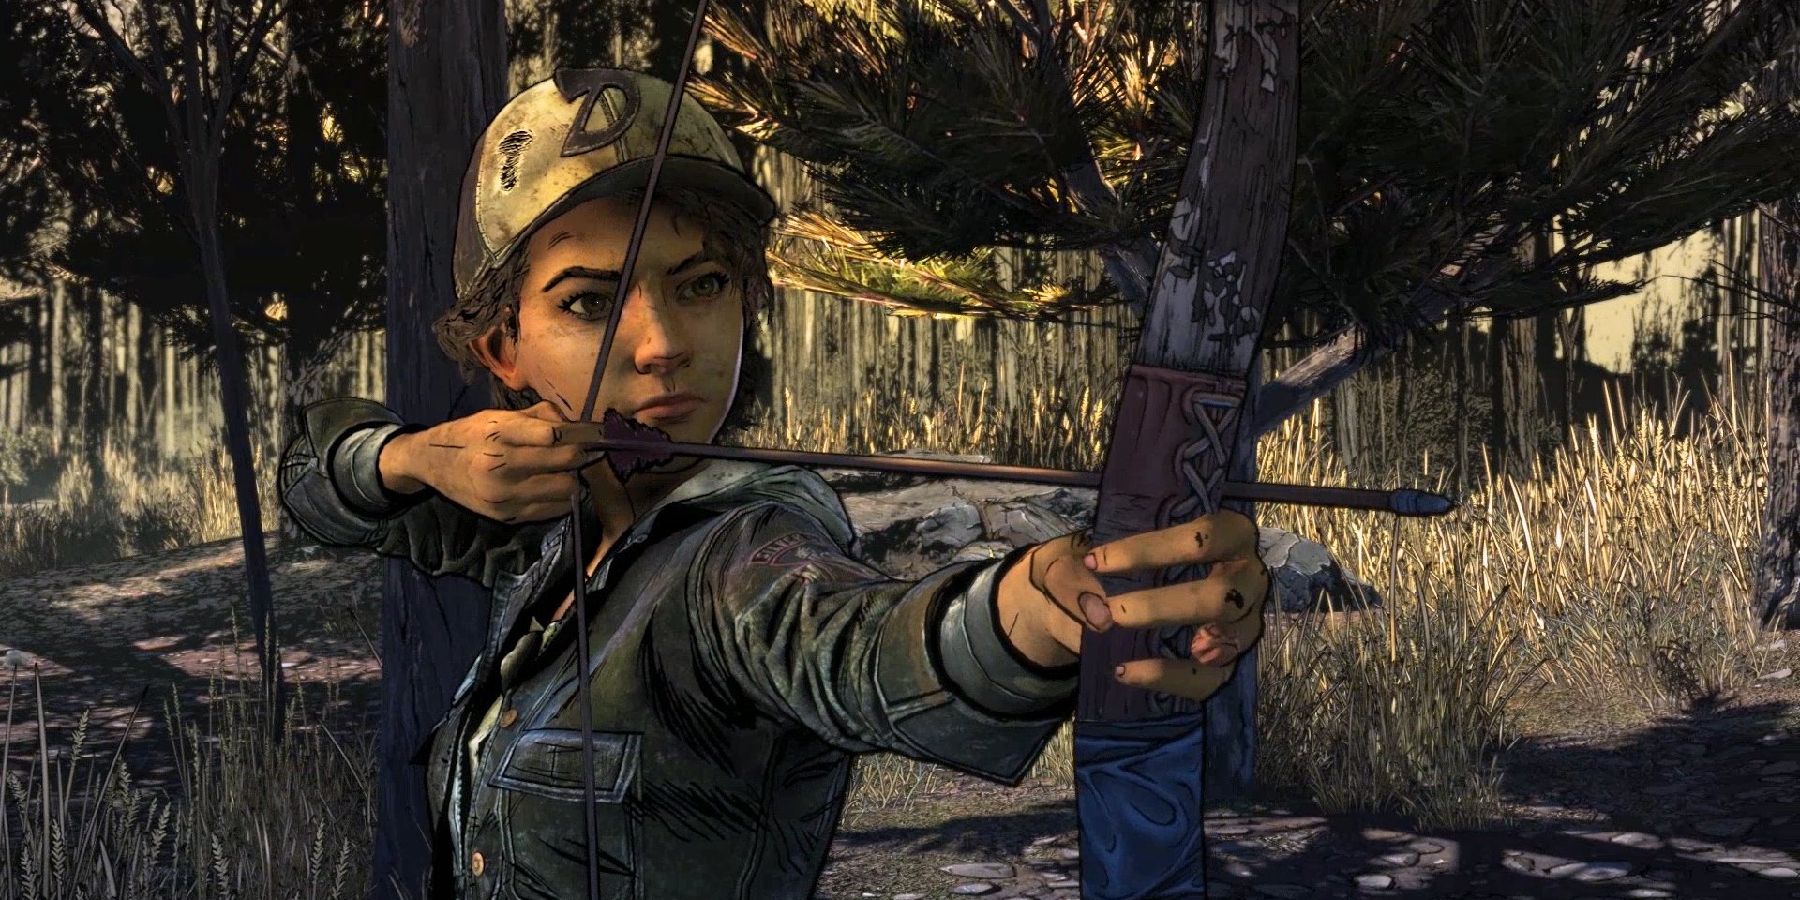 Clementine aiming a bow in Telltale's The Walking Dead